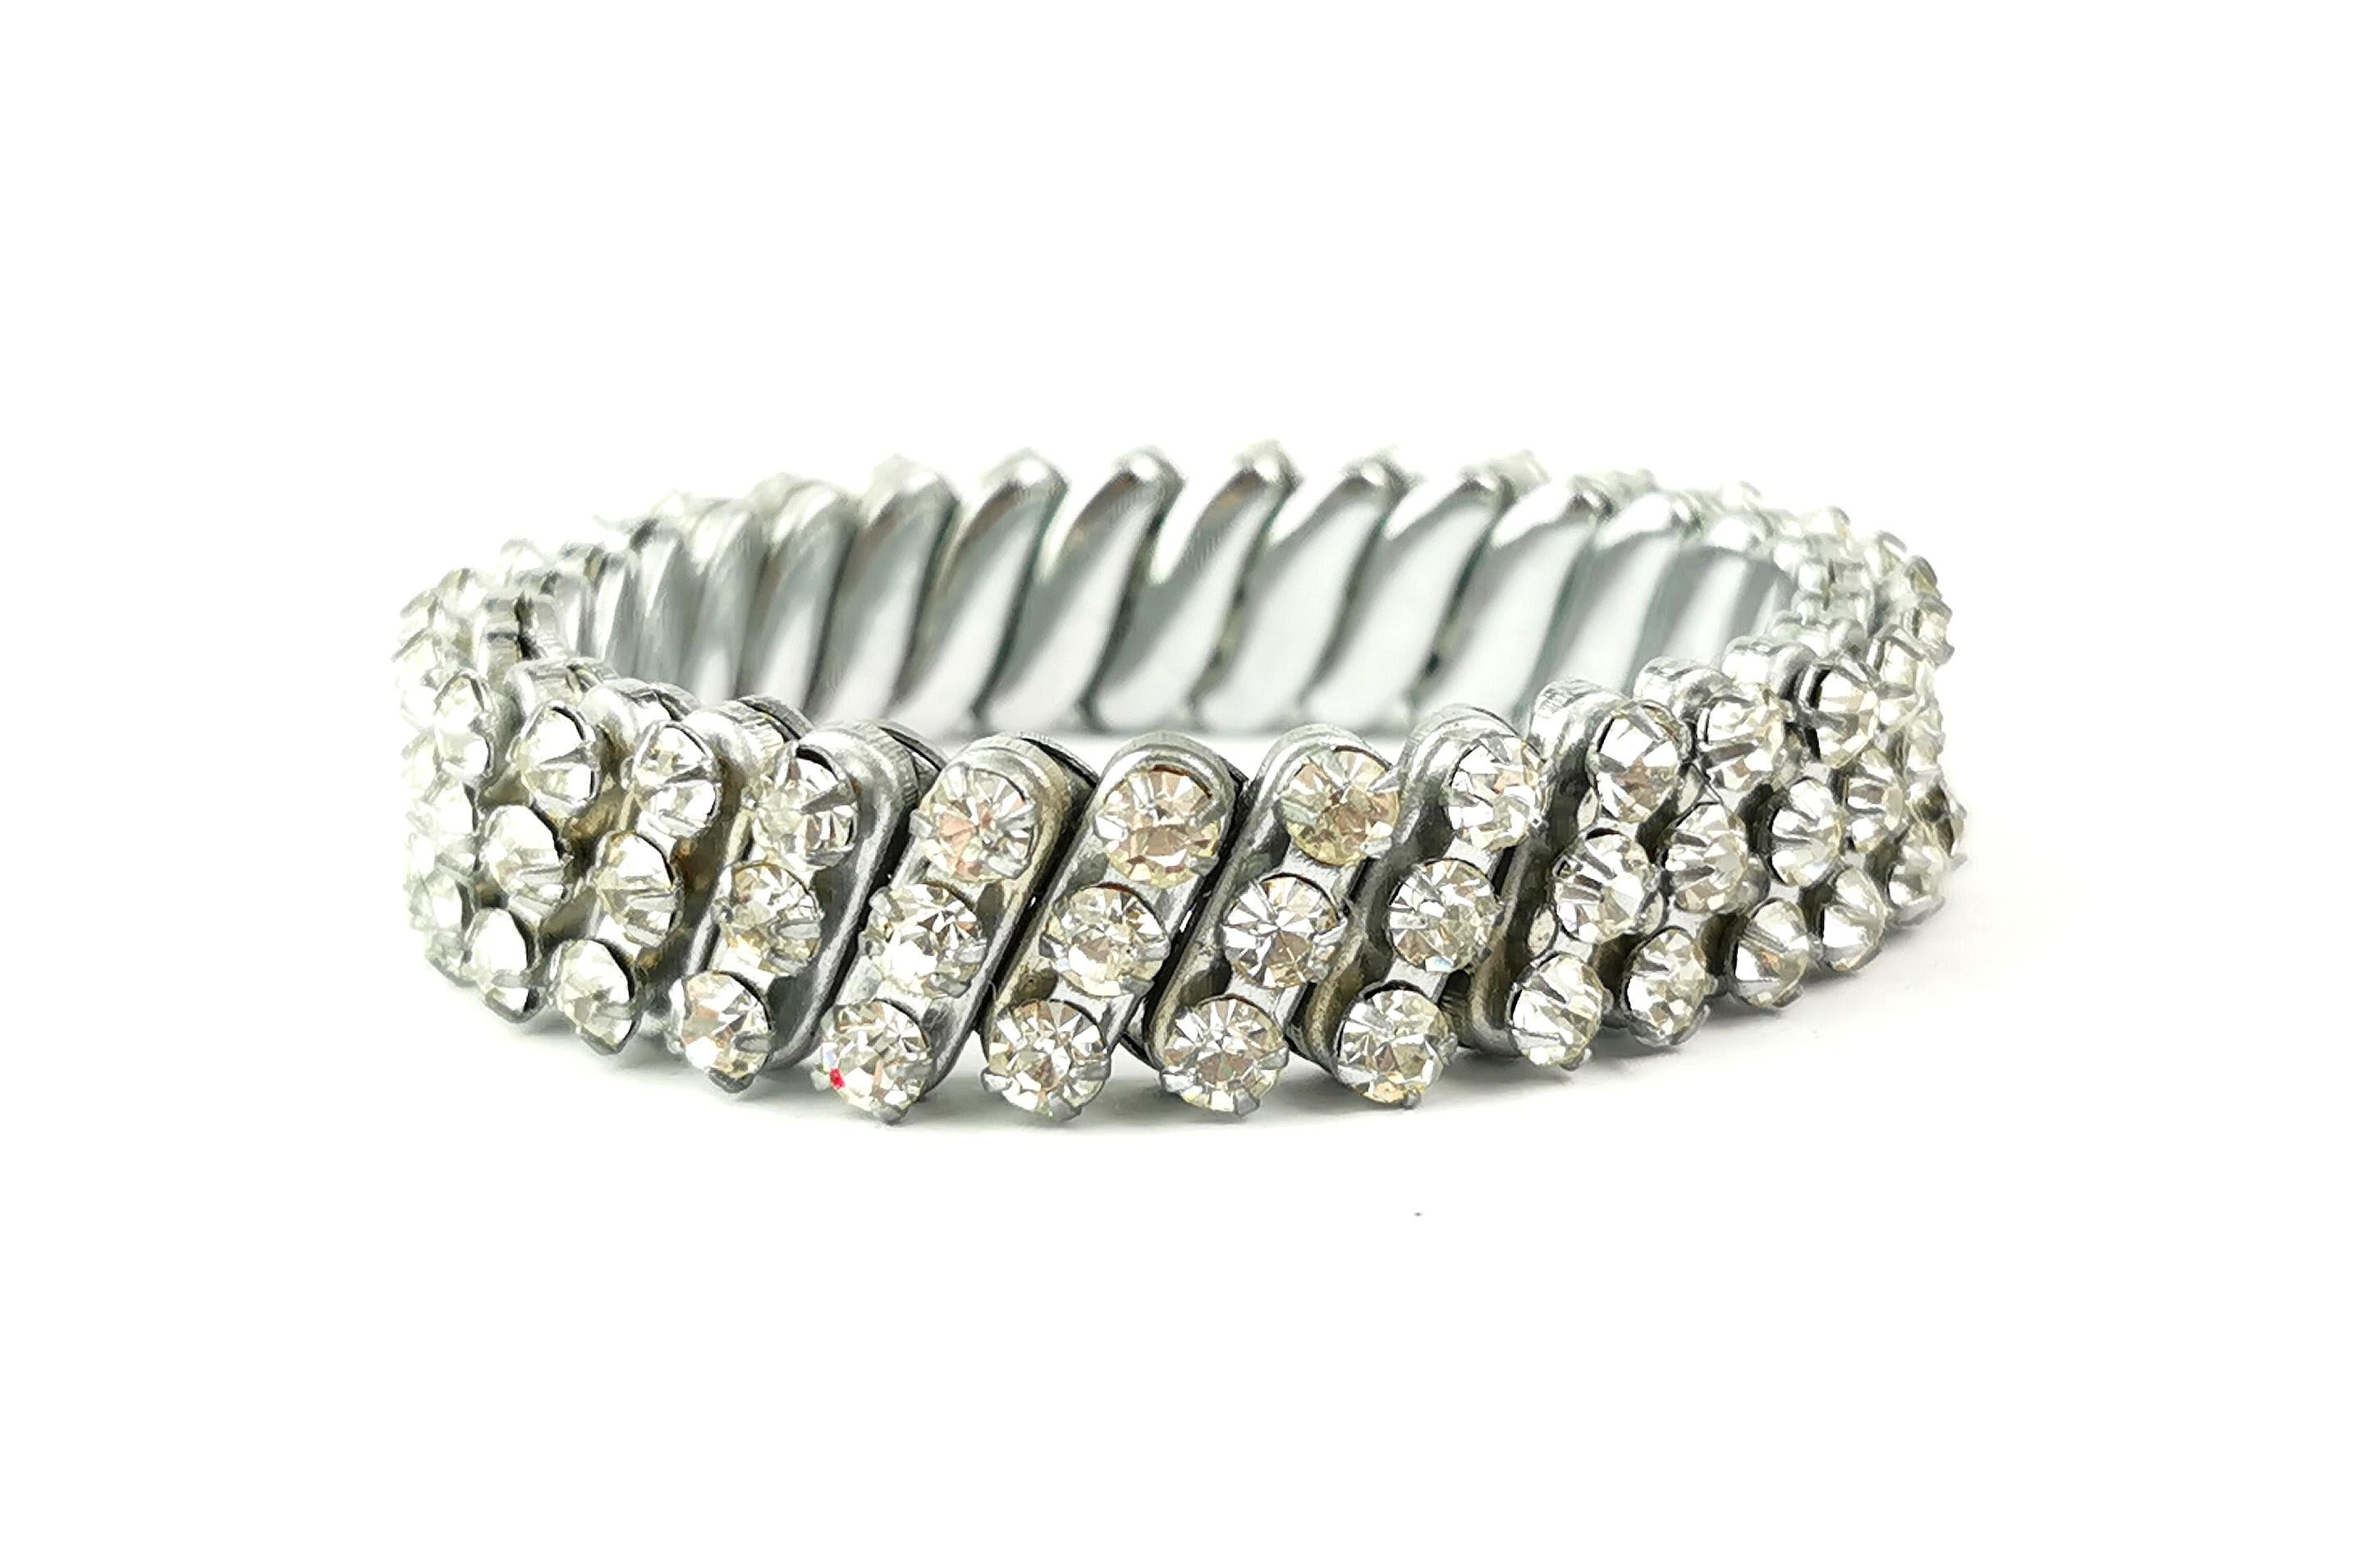 A gorgeous vintage Mid-20th century diamante bracelet.

It is an expandable bracelet in silver plated metal with stretchy links and lovely clear sparkling diamante.

The perfect piece to add a touch of glam to any outfit.

Condition:
Good used